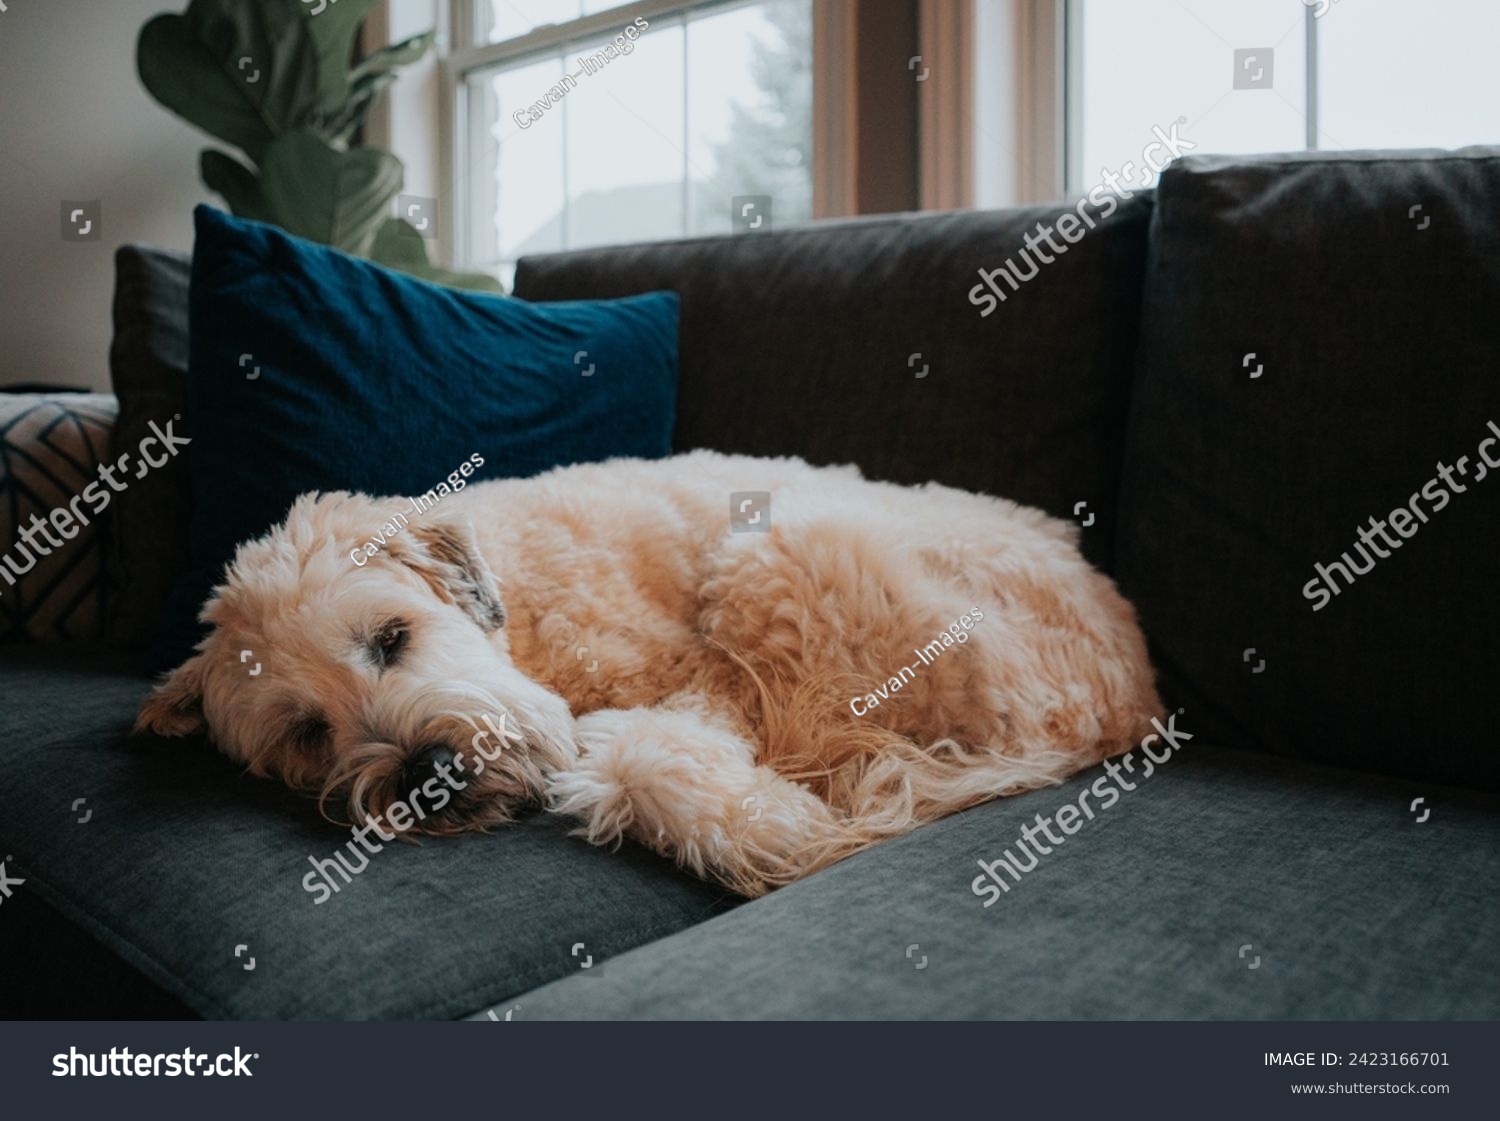 Cute fluffy dog curled up sleeping on gray sofa in a home. #2423166701